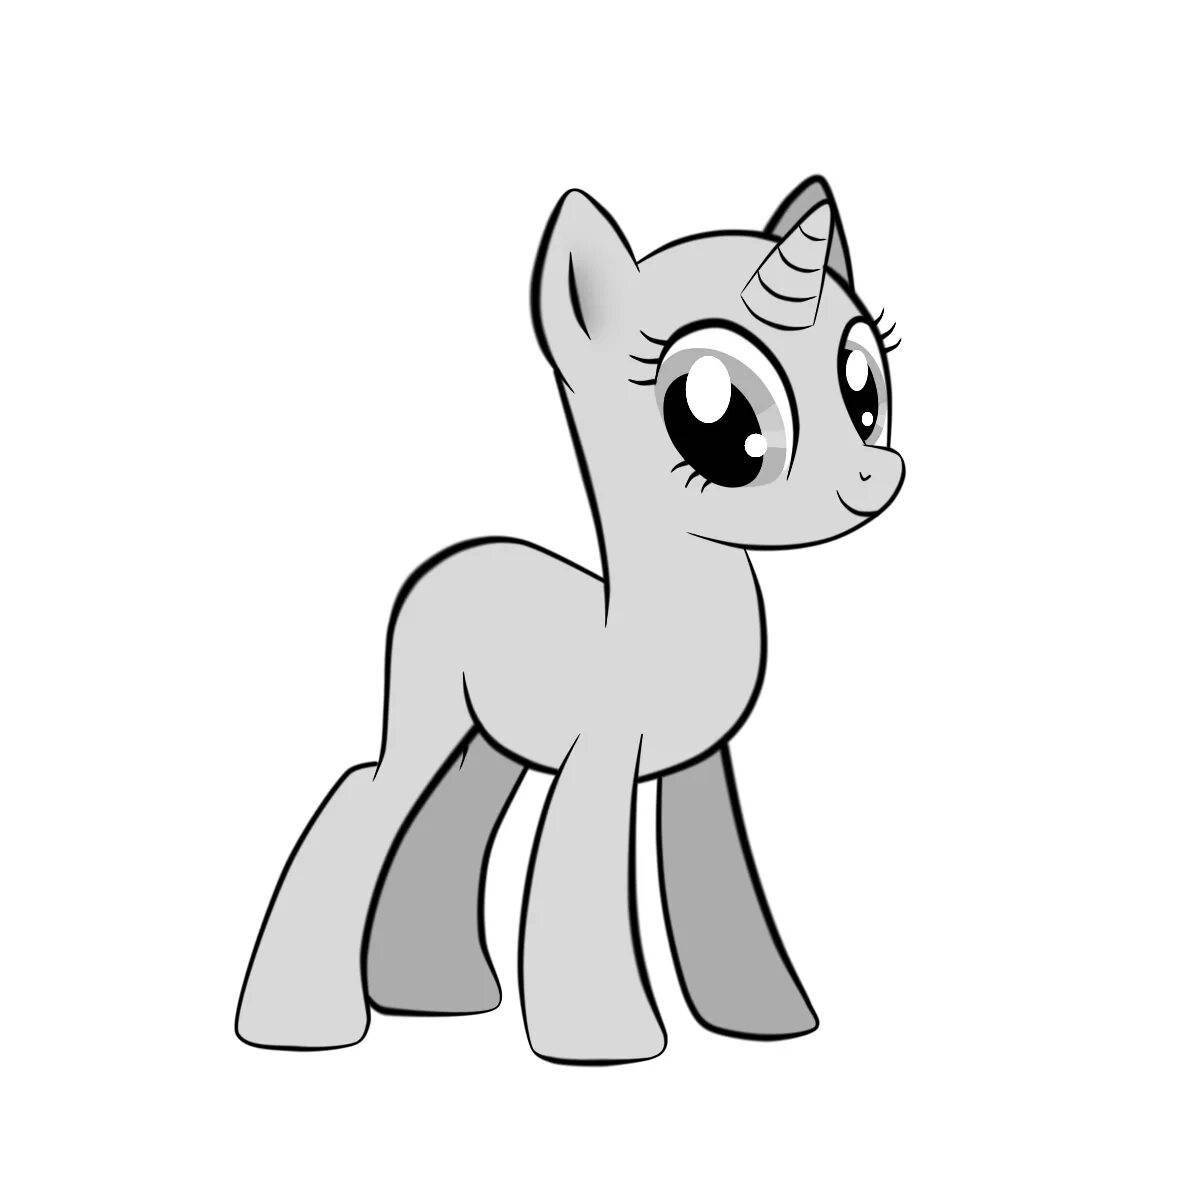 Coloring page adorable pony mannequin